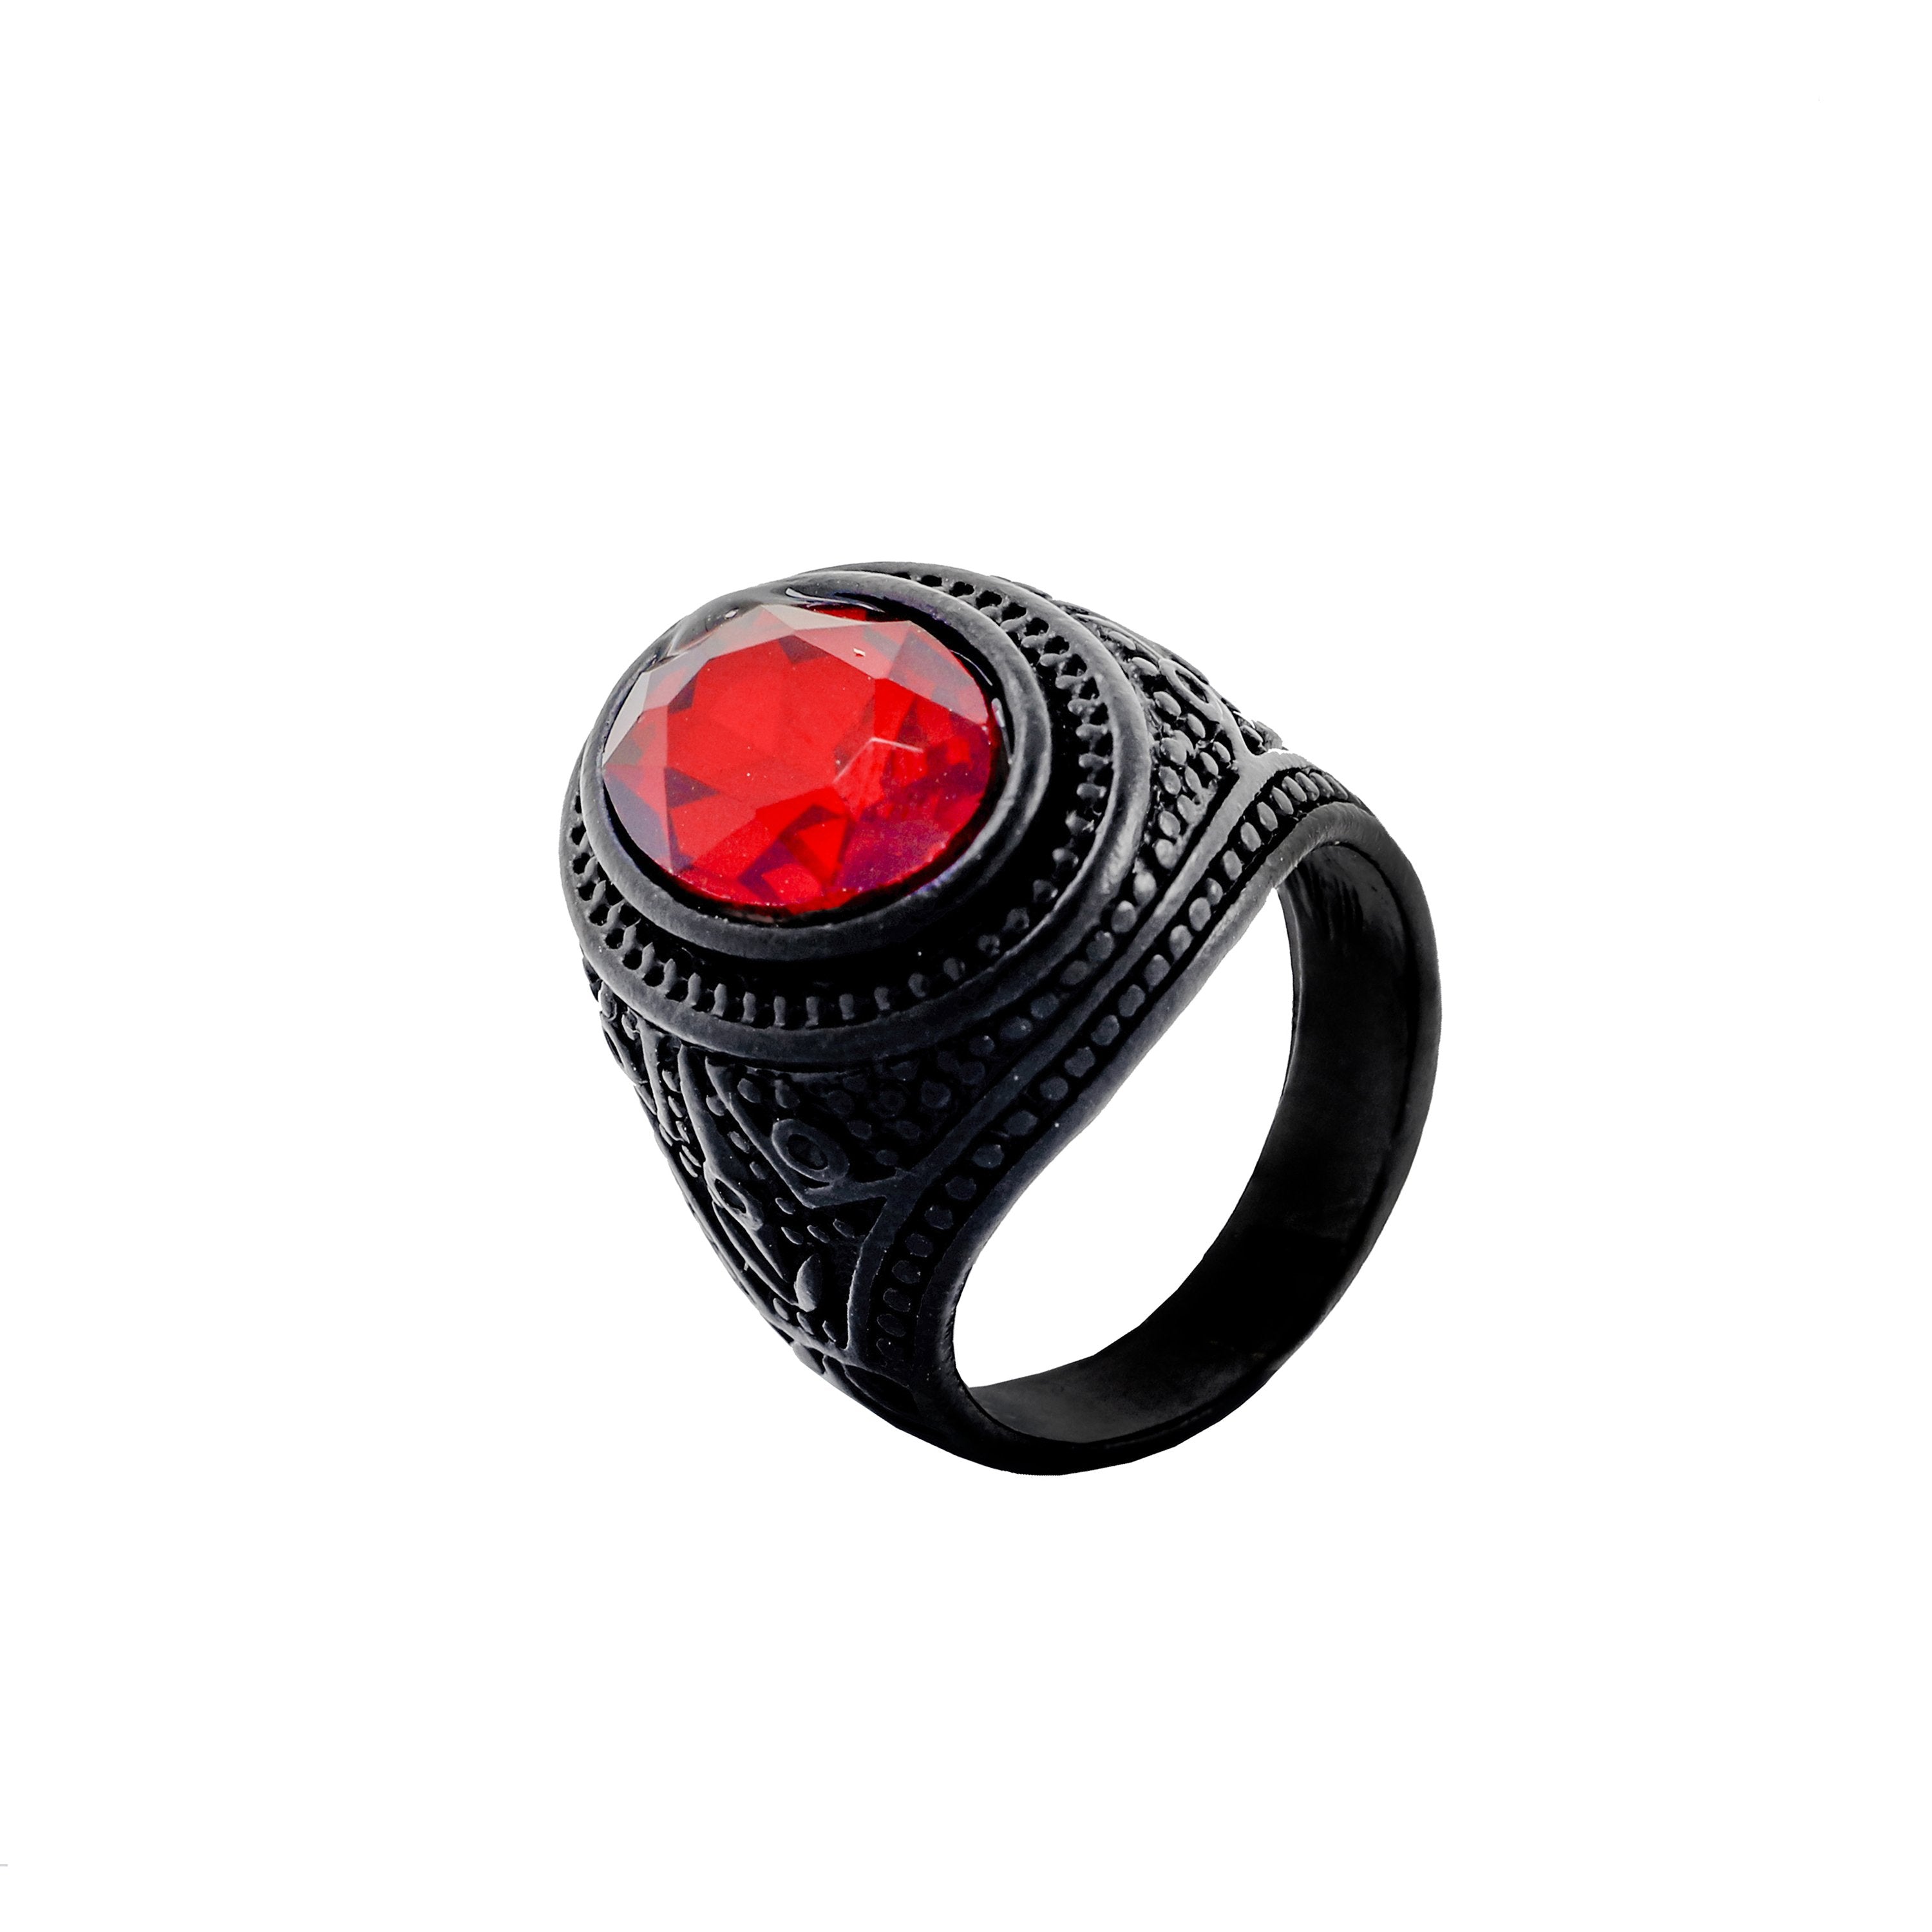 Round Black Red Ruby Crystal Band Ring Women Gift